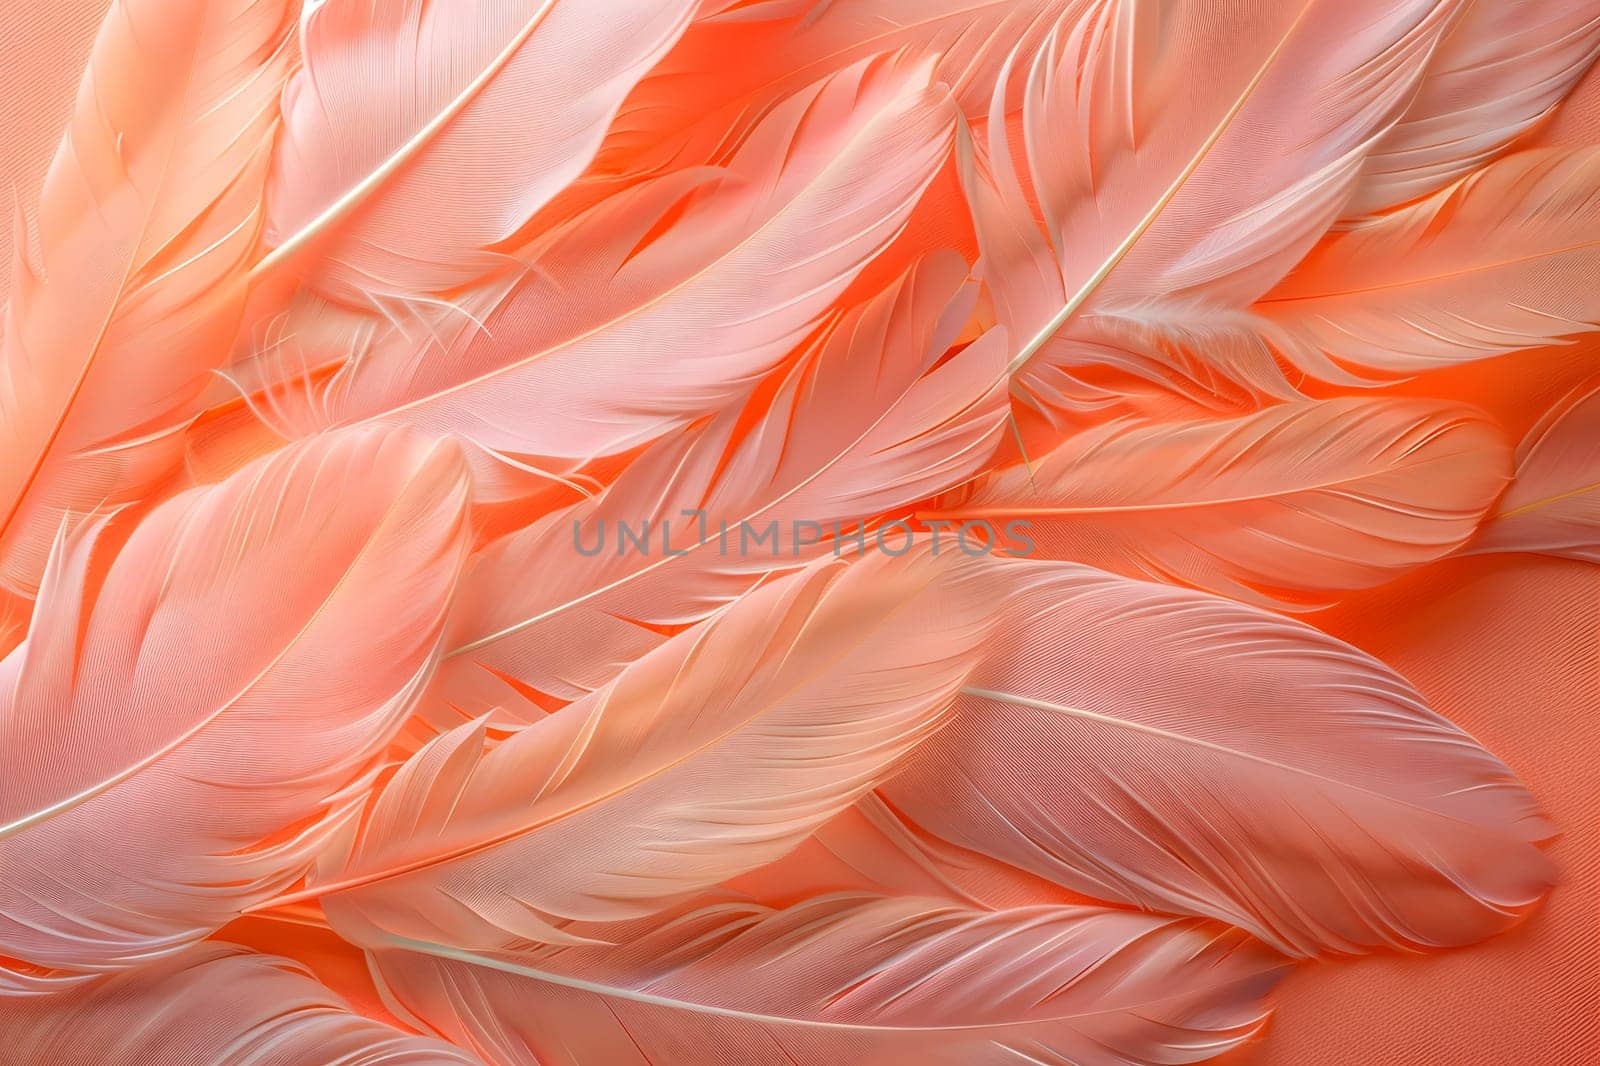 Closeup of soft pink feathers on a peach background by Nadtochiy